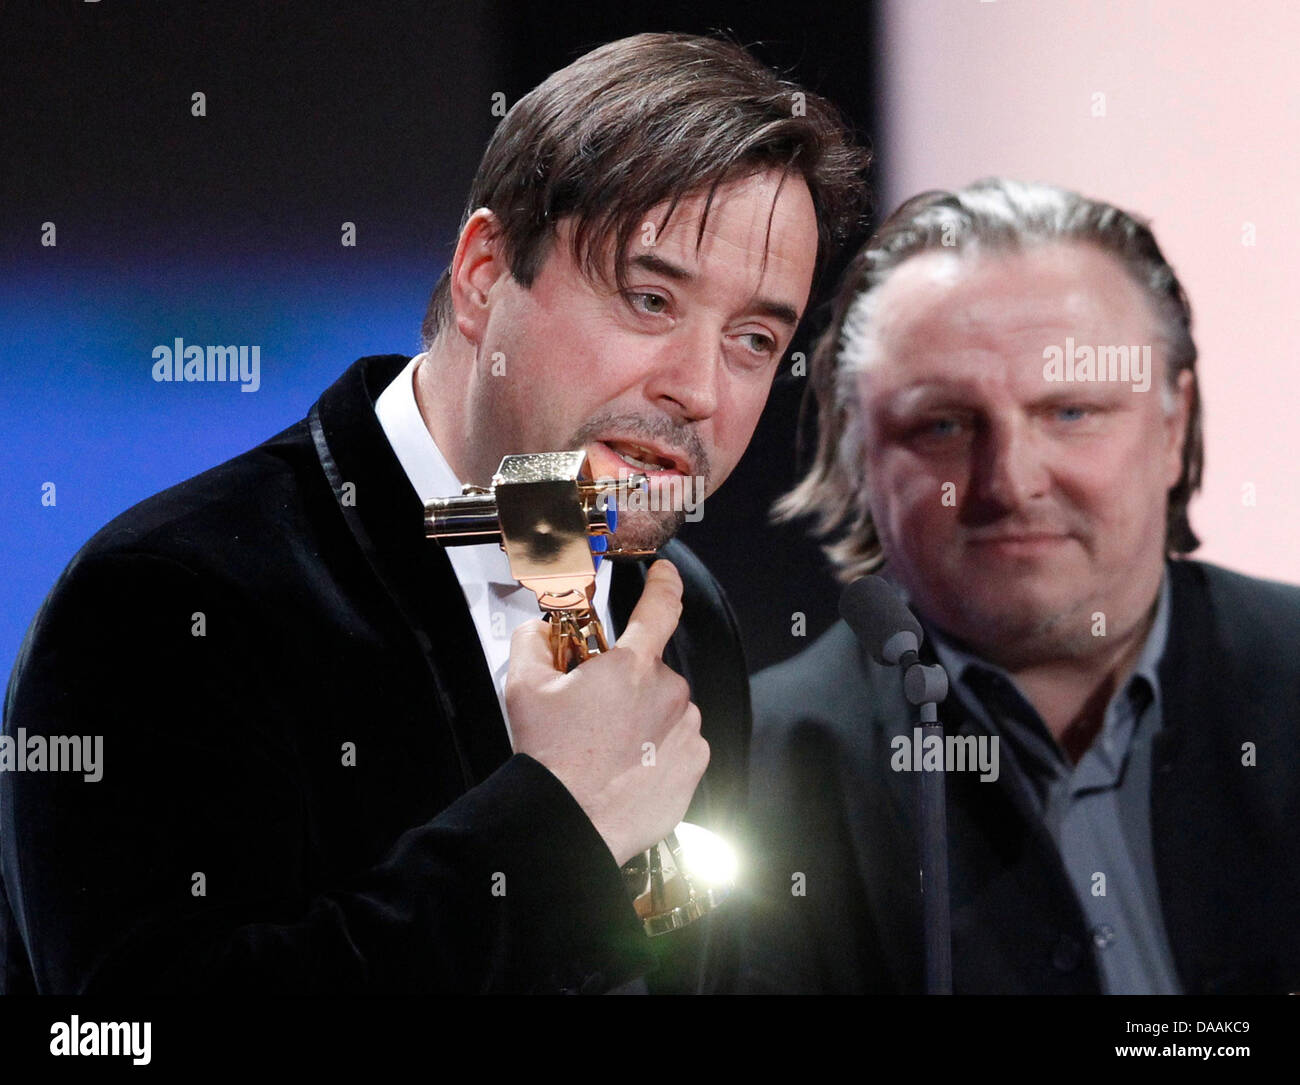 German actors Jan Josef Liefers (L) and Axel Prahl receive the readers award for the best crime series team during the 46th Golden Camera award ceremony in Berlin, Germany, 5 February 2011. The award honours the audience's favourites from film, television, sports and media. Photo: Tobias Schwarz dpa/lbn Stock Photo